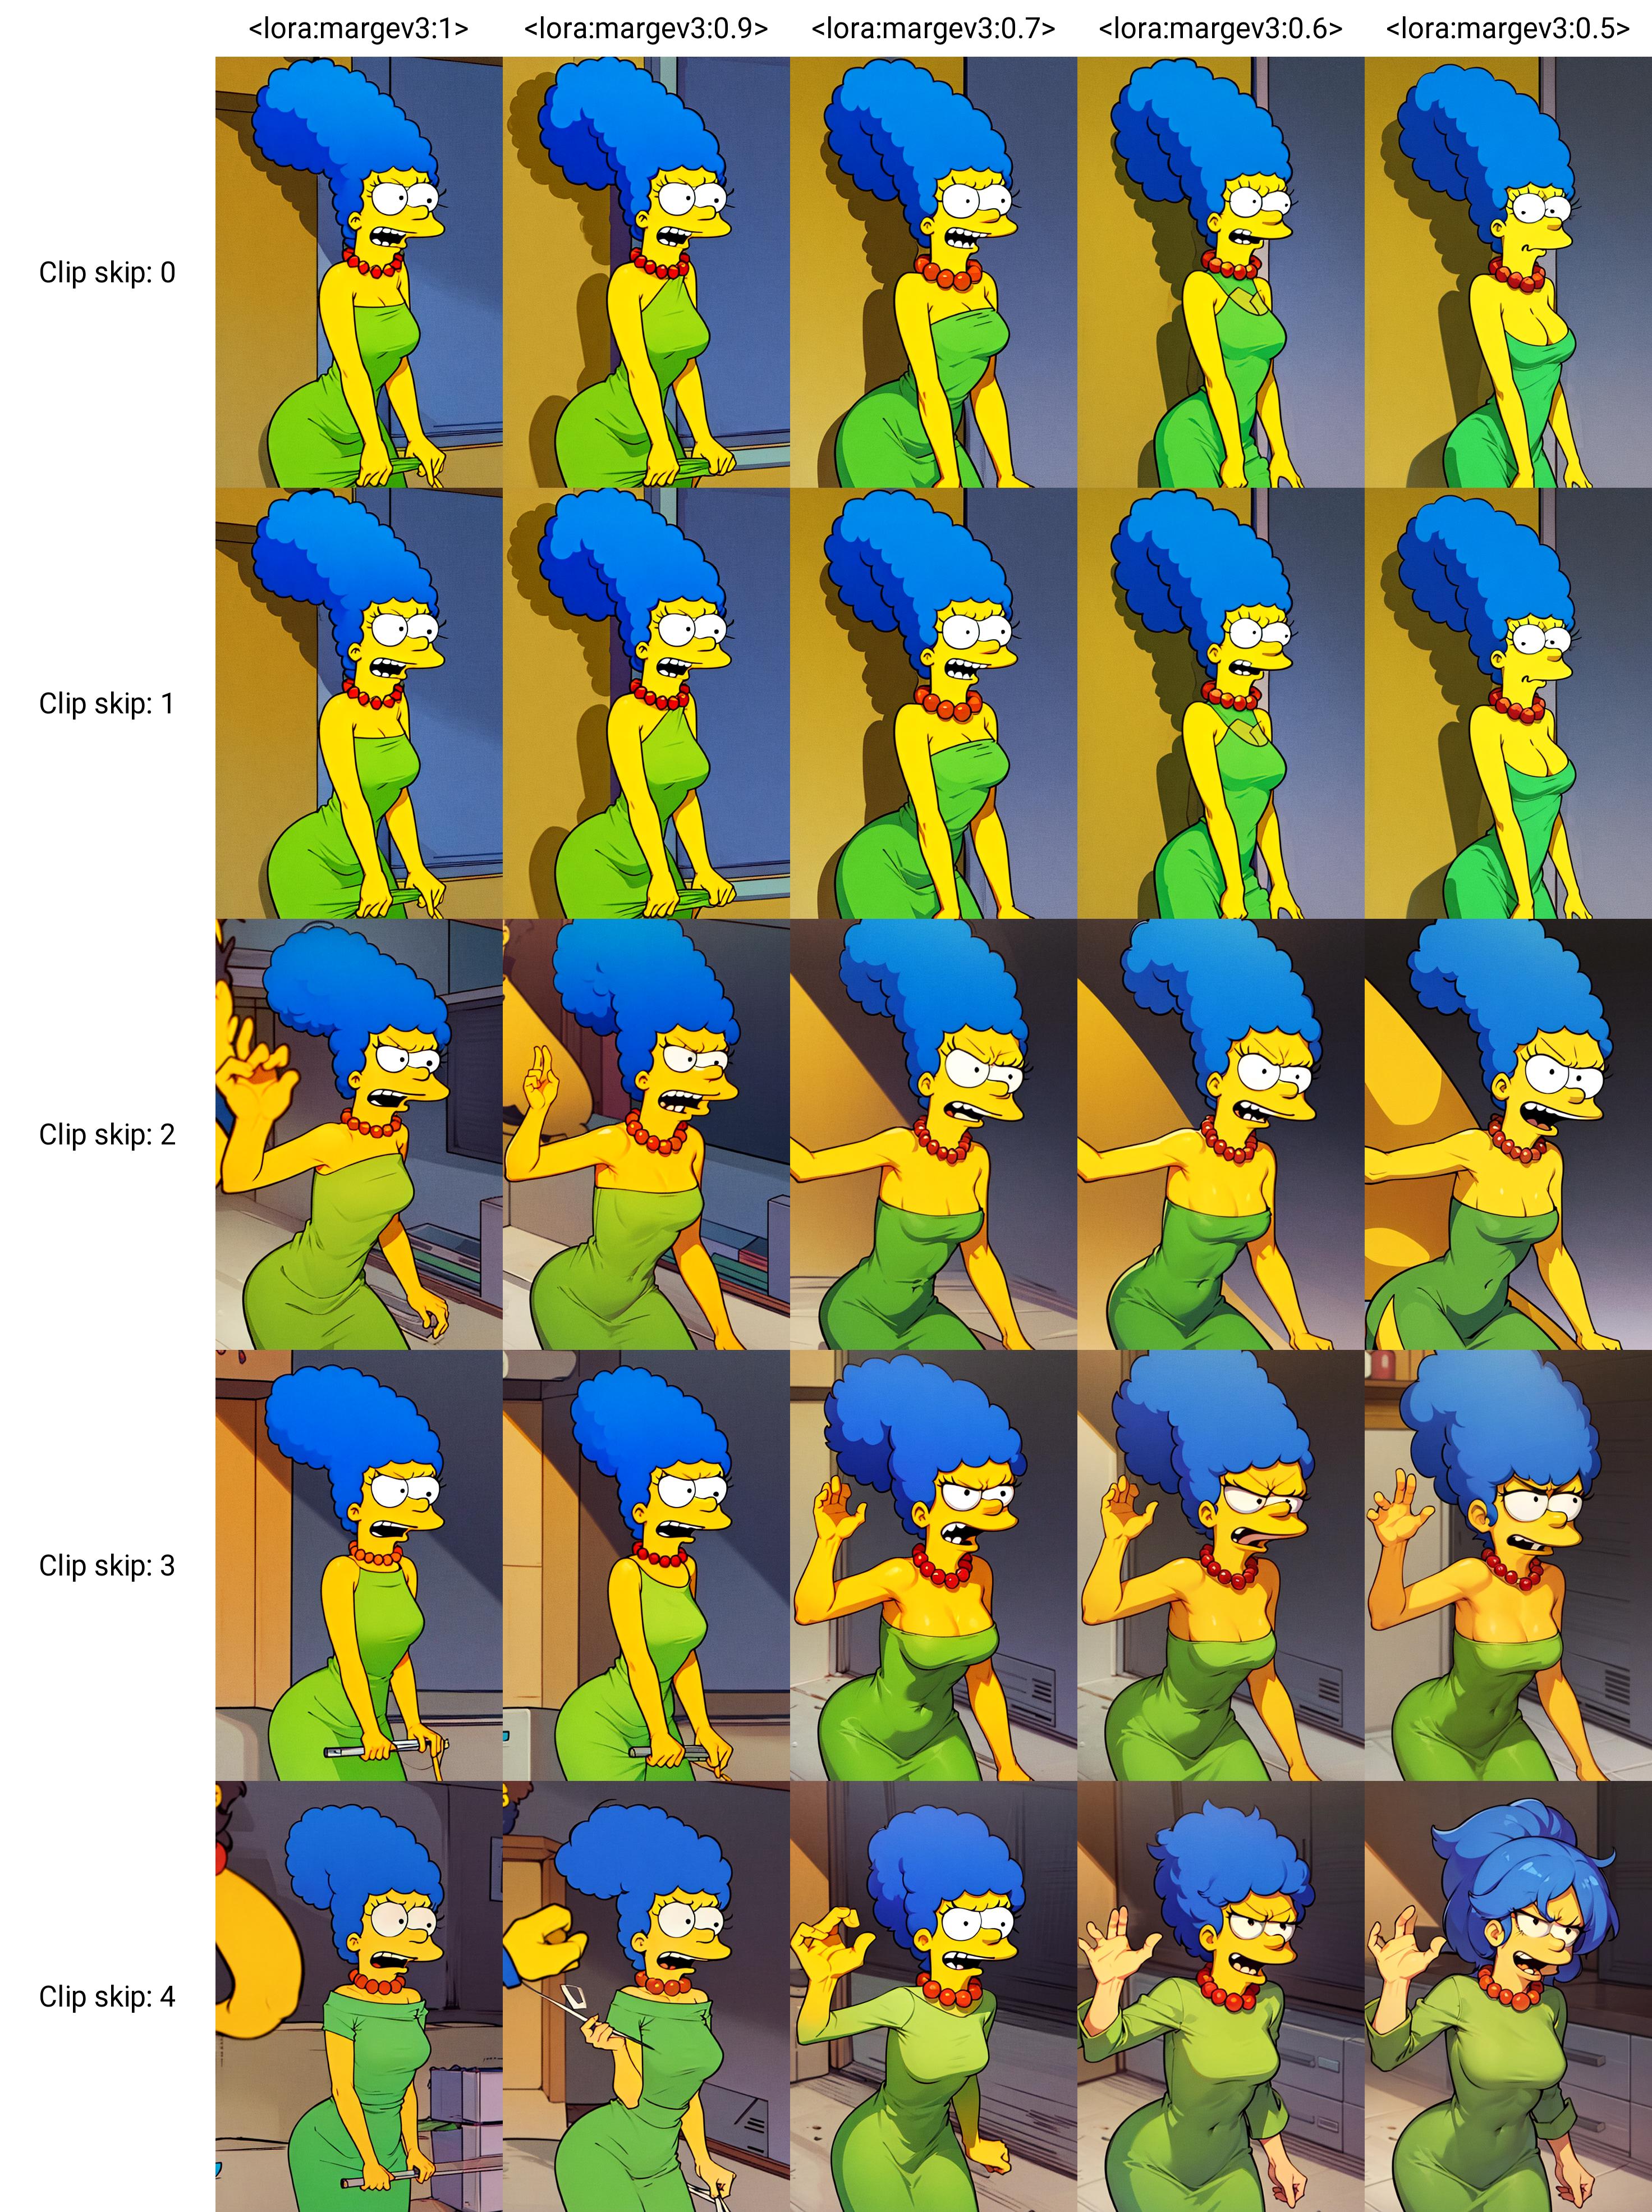 Fonglets Marge Simpson image by fongletto